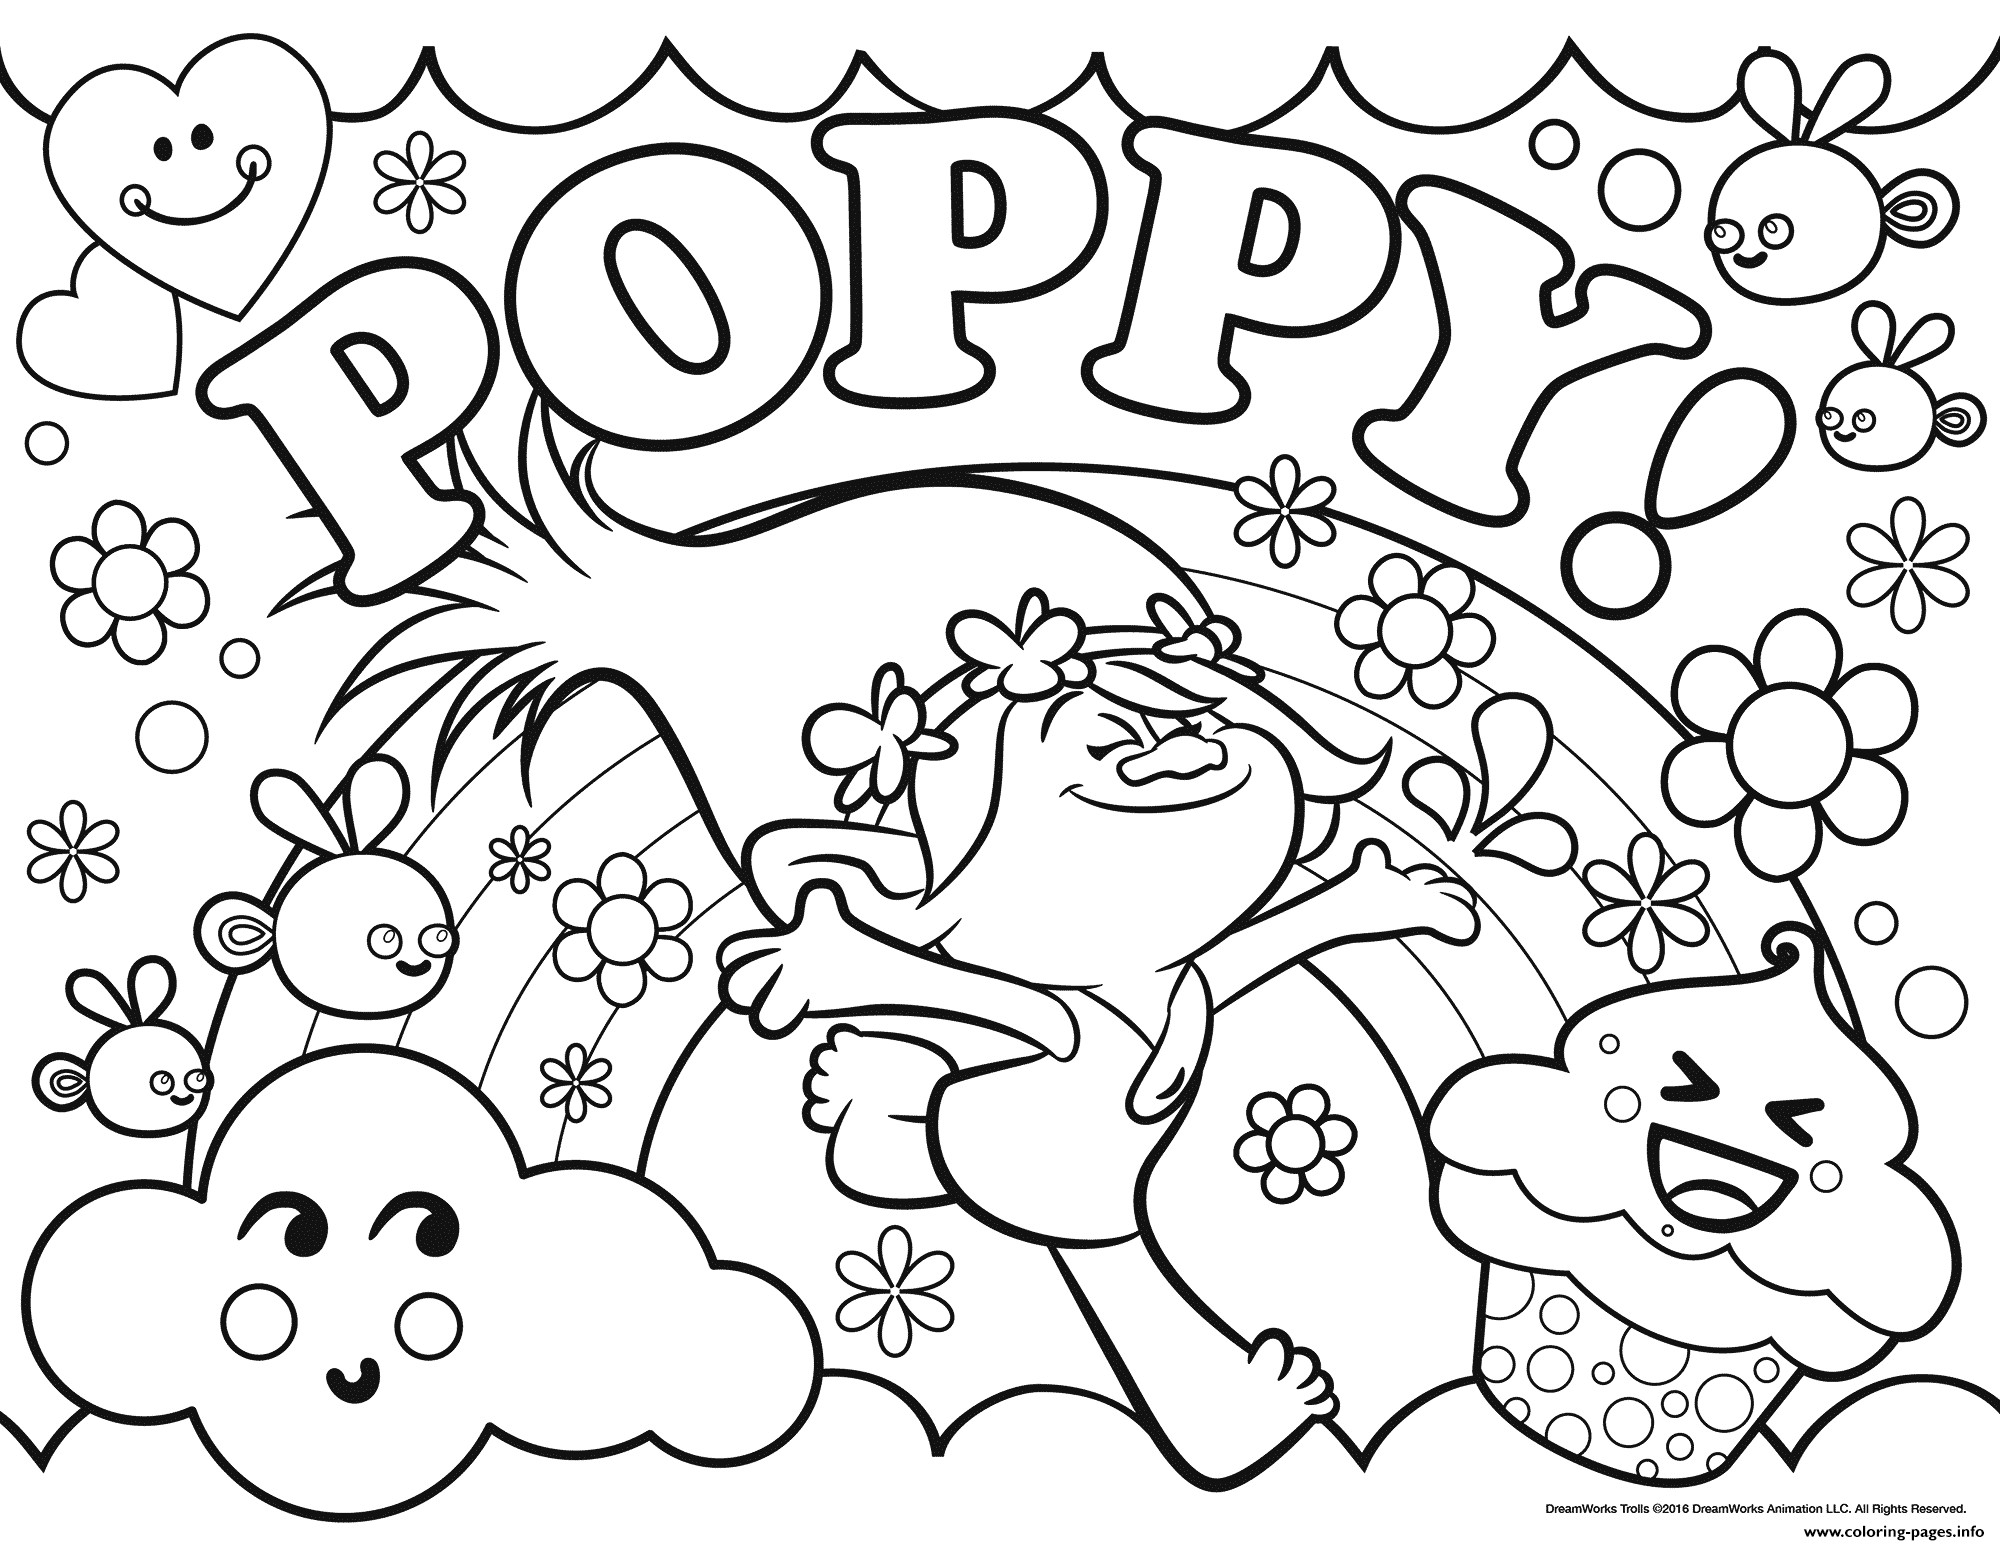 Trolls Easter Coloring Pages Wallpaper